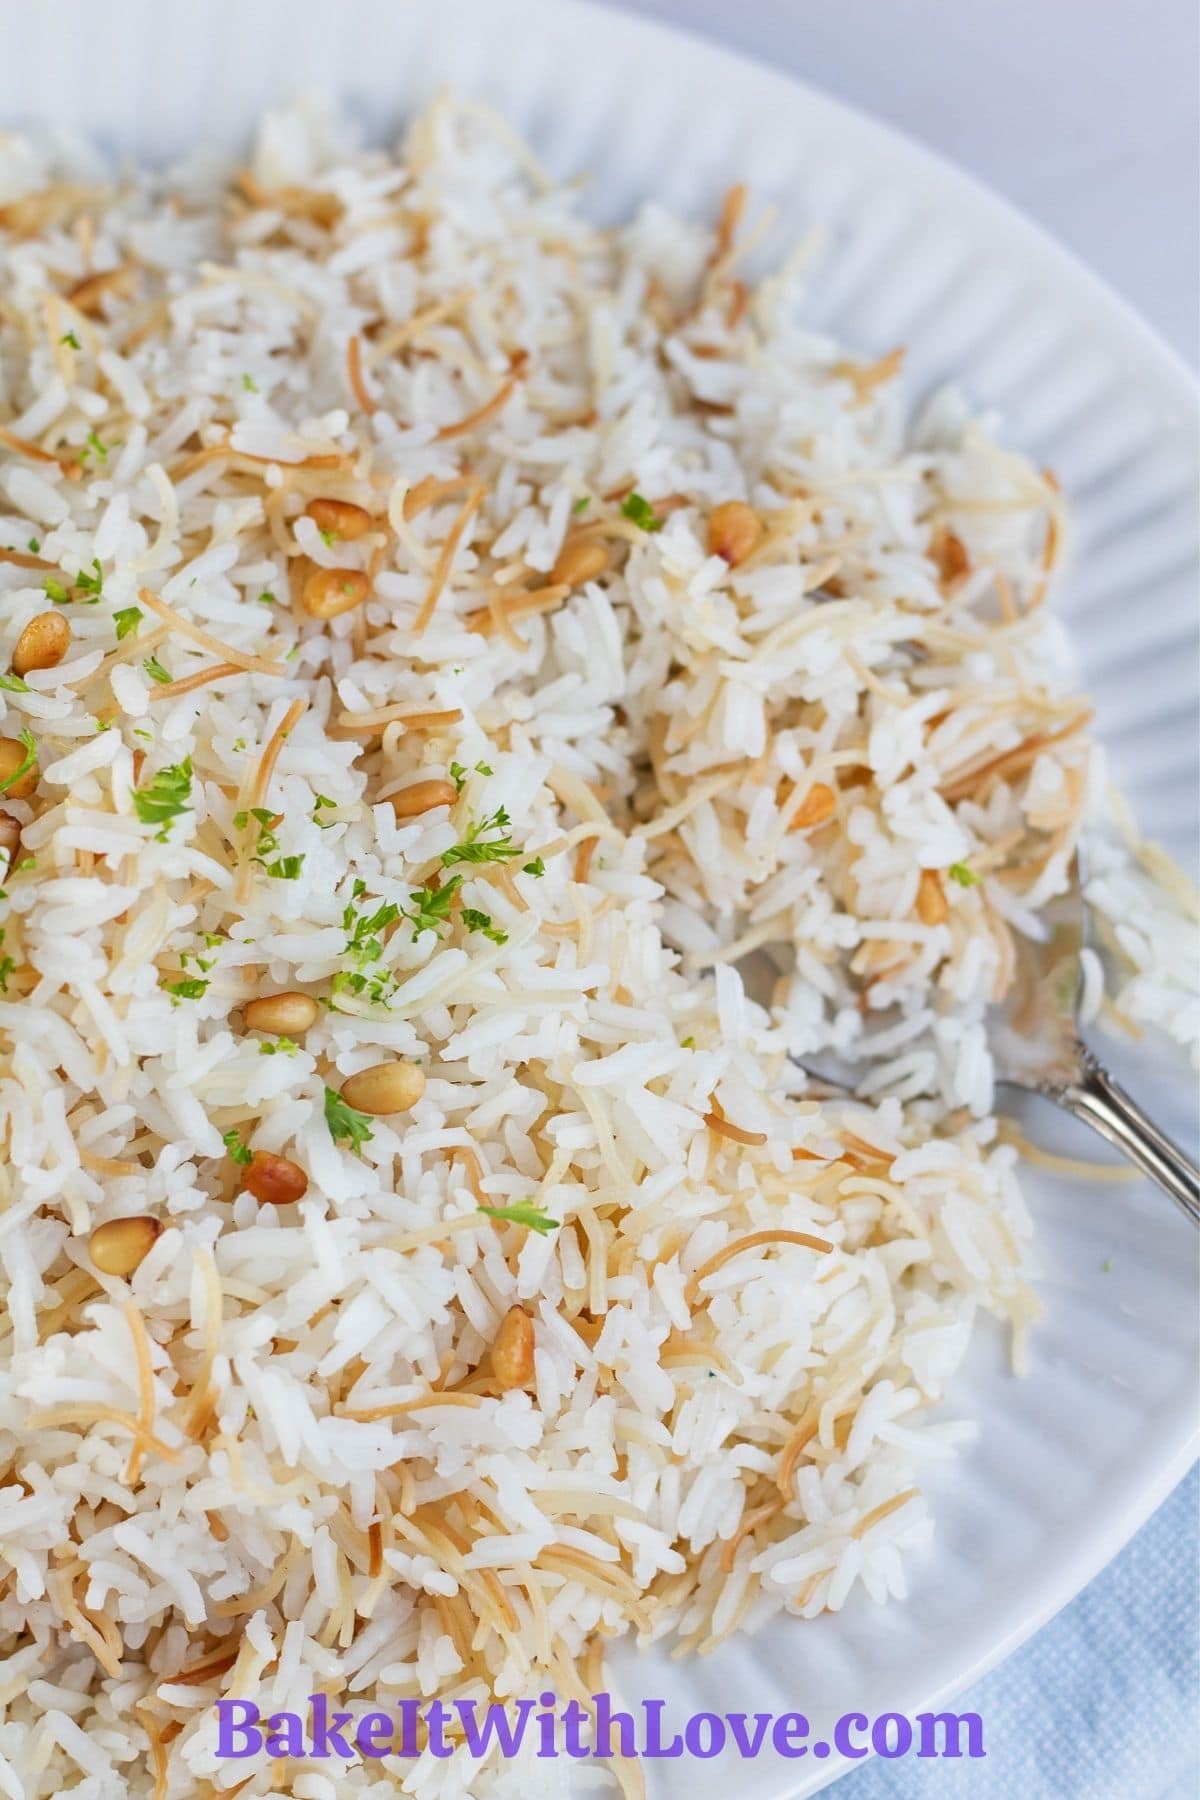 Beautiful and fragrant vermicelli rice served on large white platter.